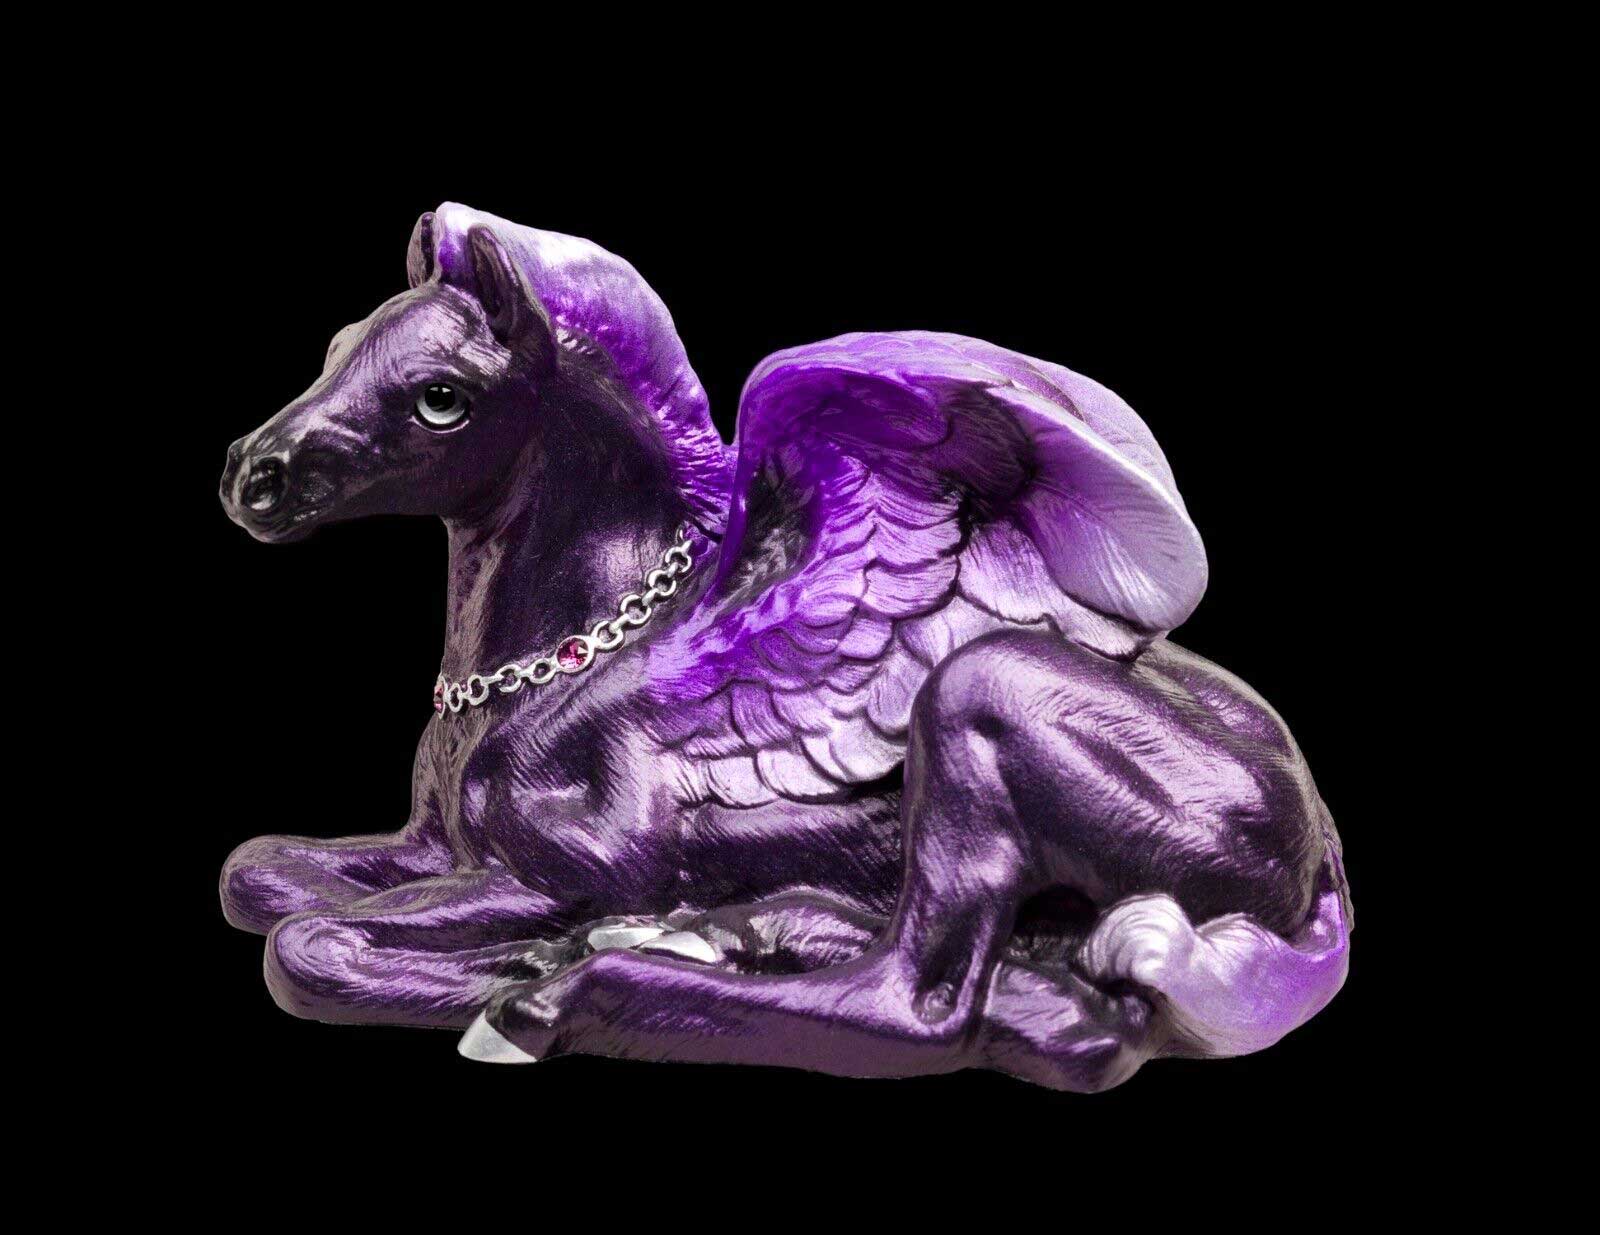 20221115-Twilight-Amethyst-Baby-Pegasus-Test-Paint-1-by-Gina